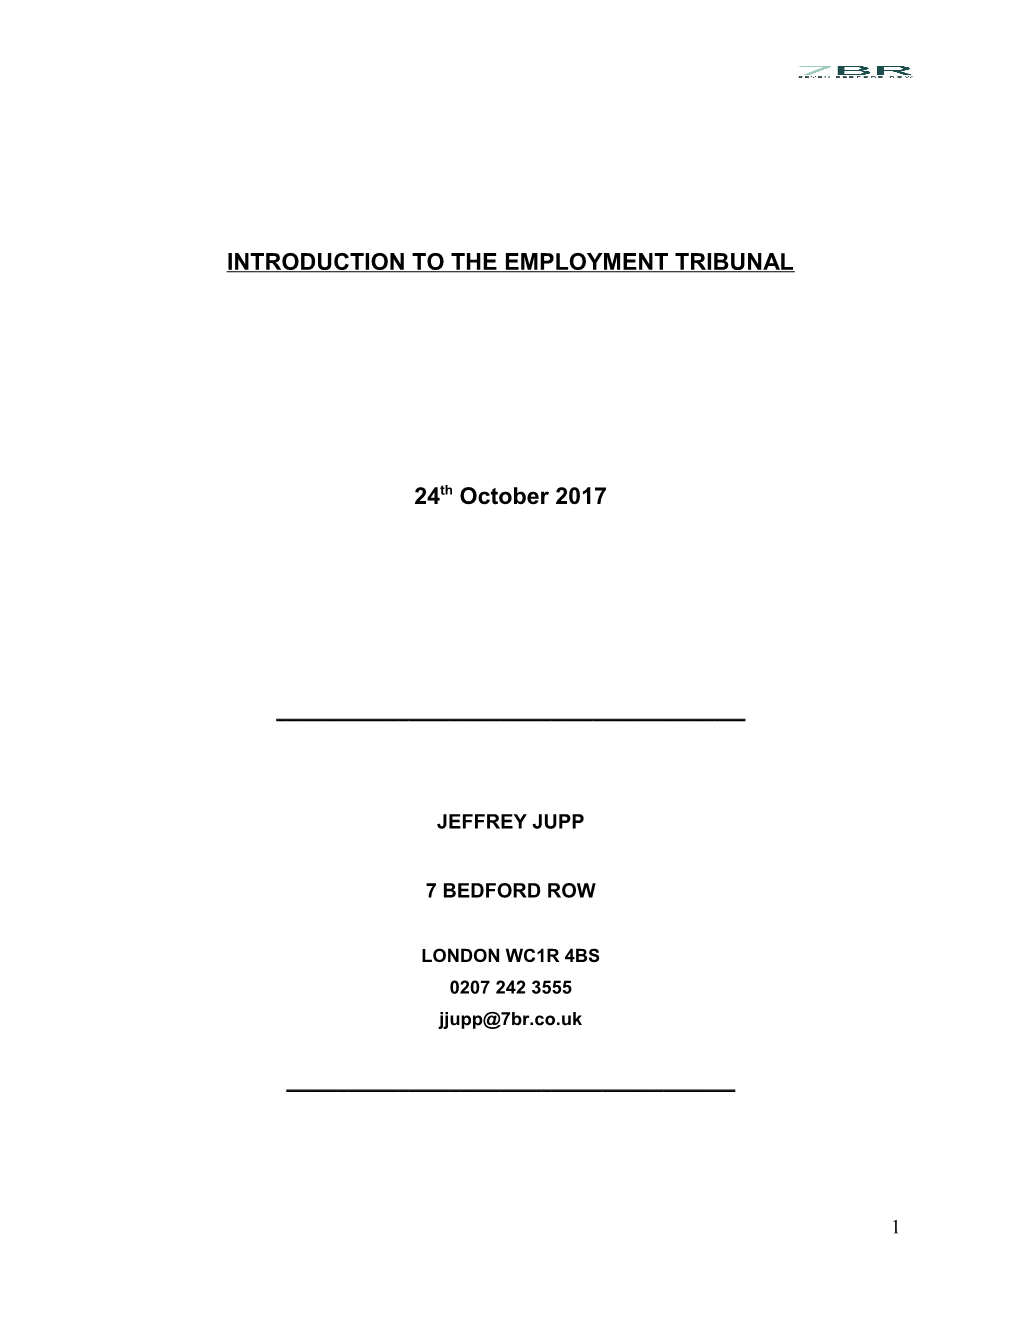 Introduction to the Employment Tribunal